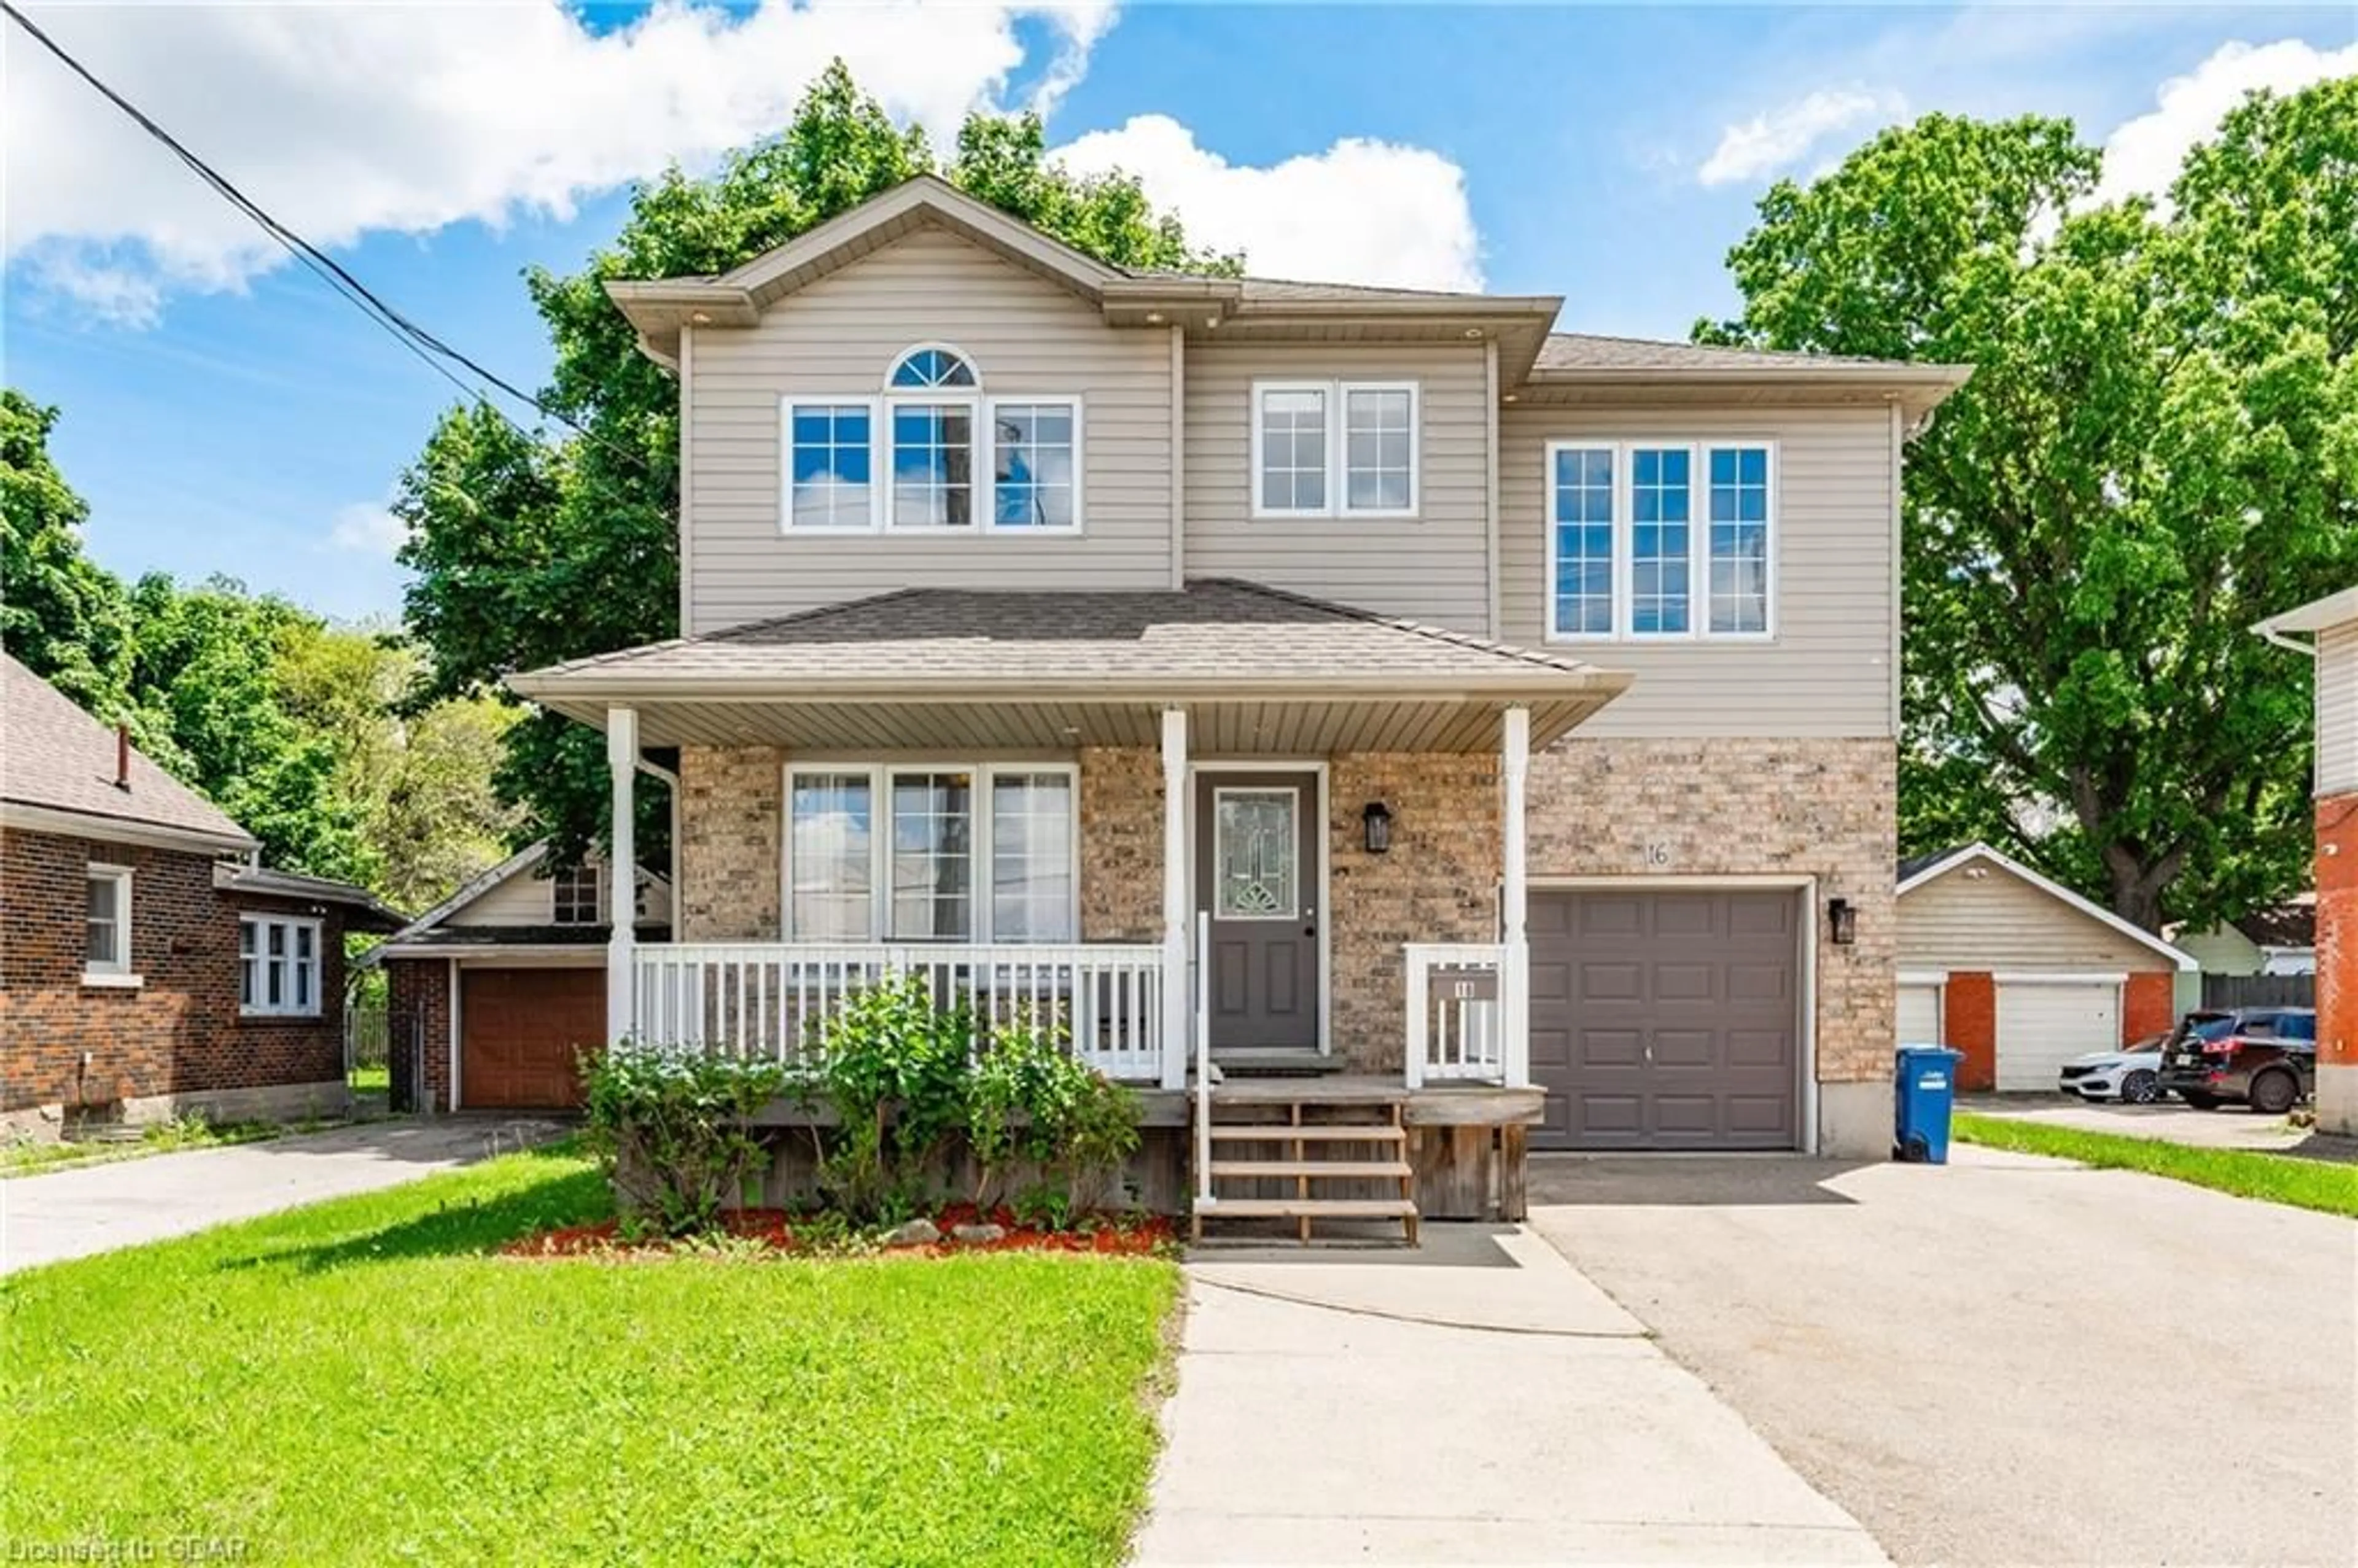 Frontside or backside of a home for 16 Speedvale Ave, Guelph Ontario N1H 1J4